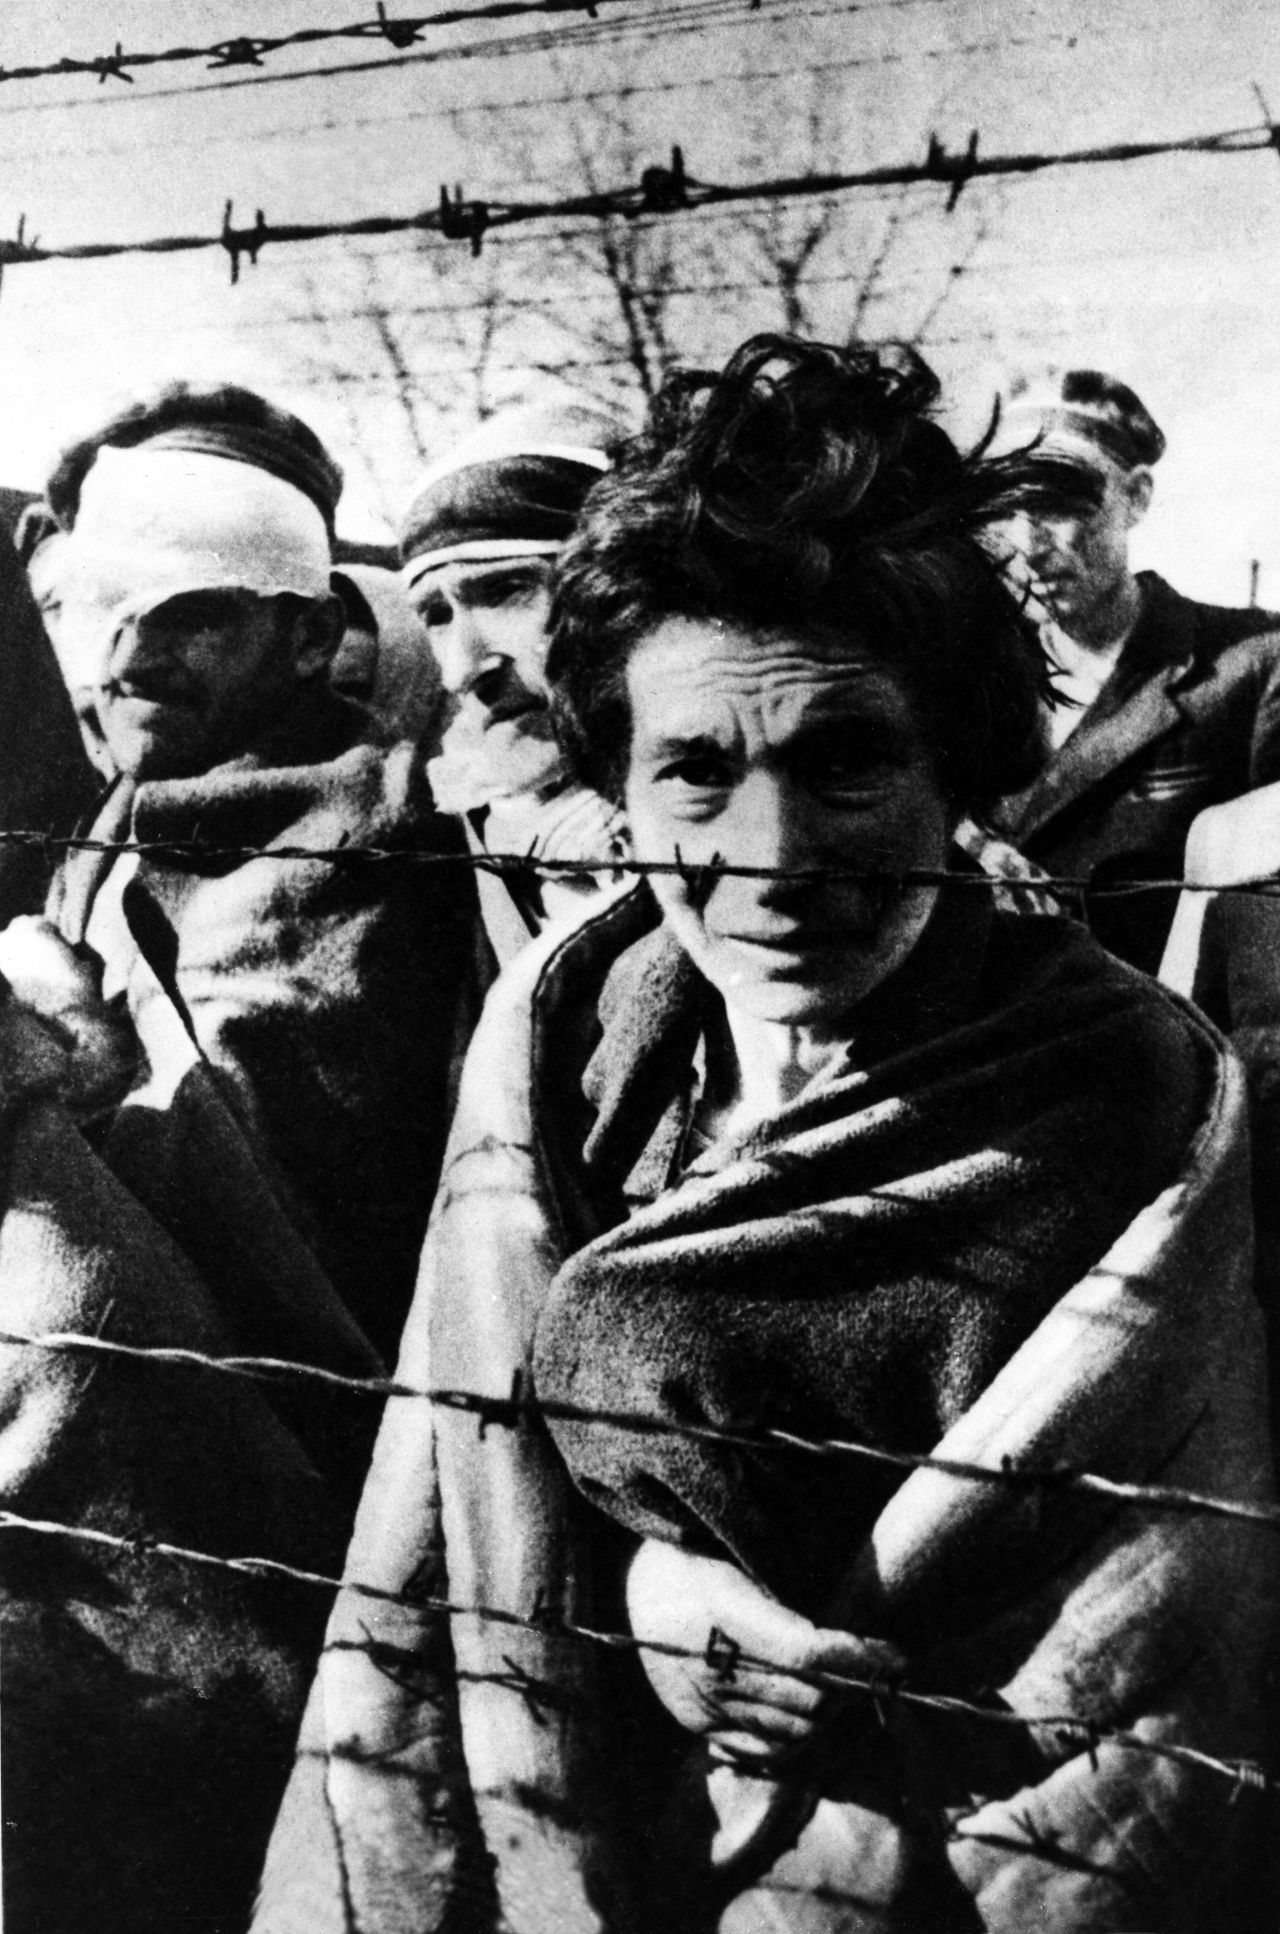 A few survivors of Auschwitz stand near the fence during the arrival of the Red Army on January 27,1945.